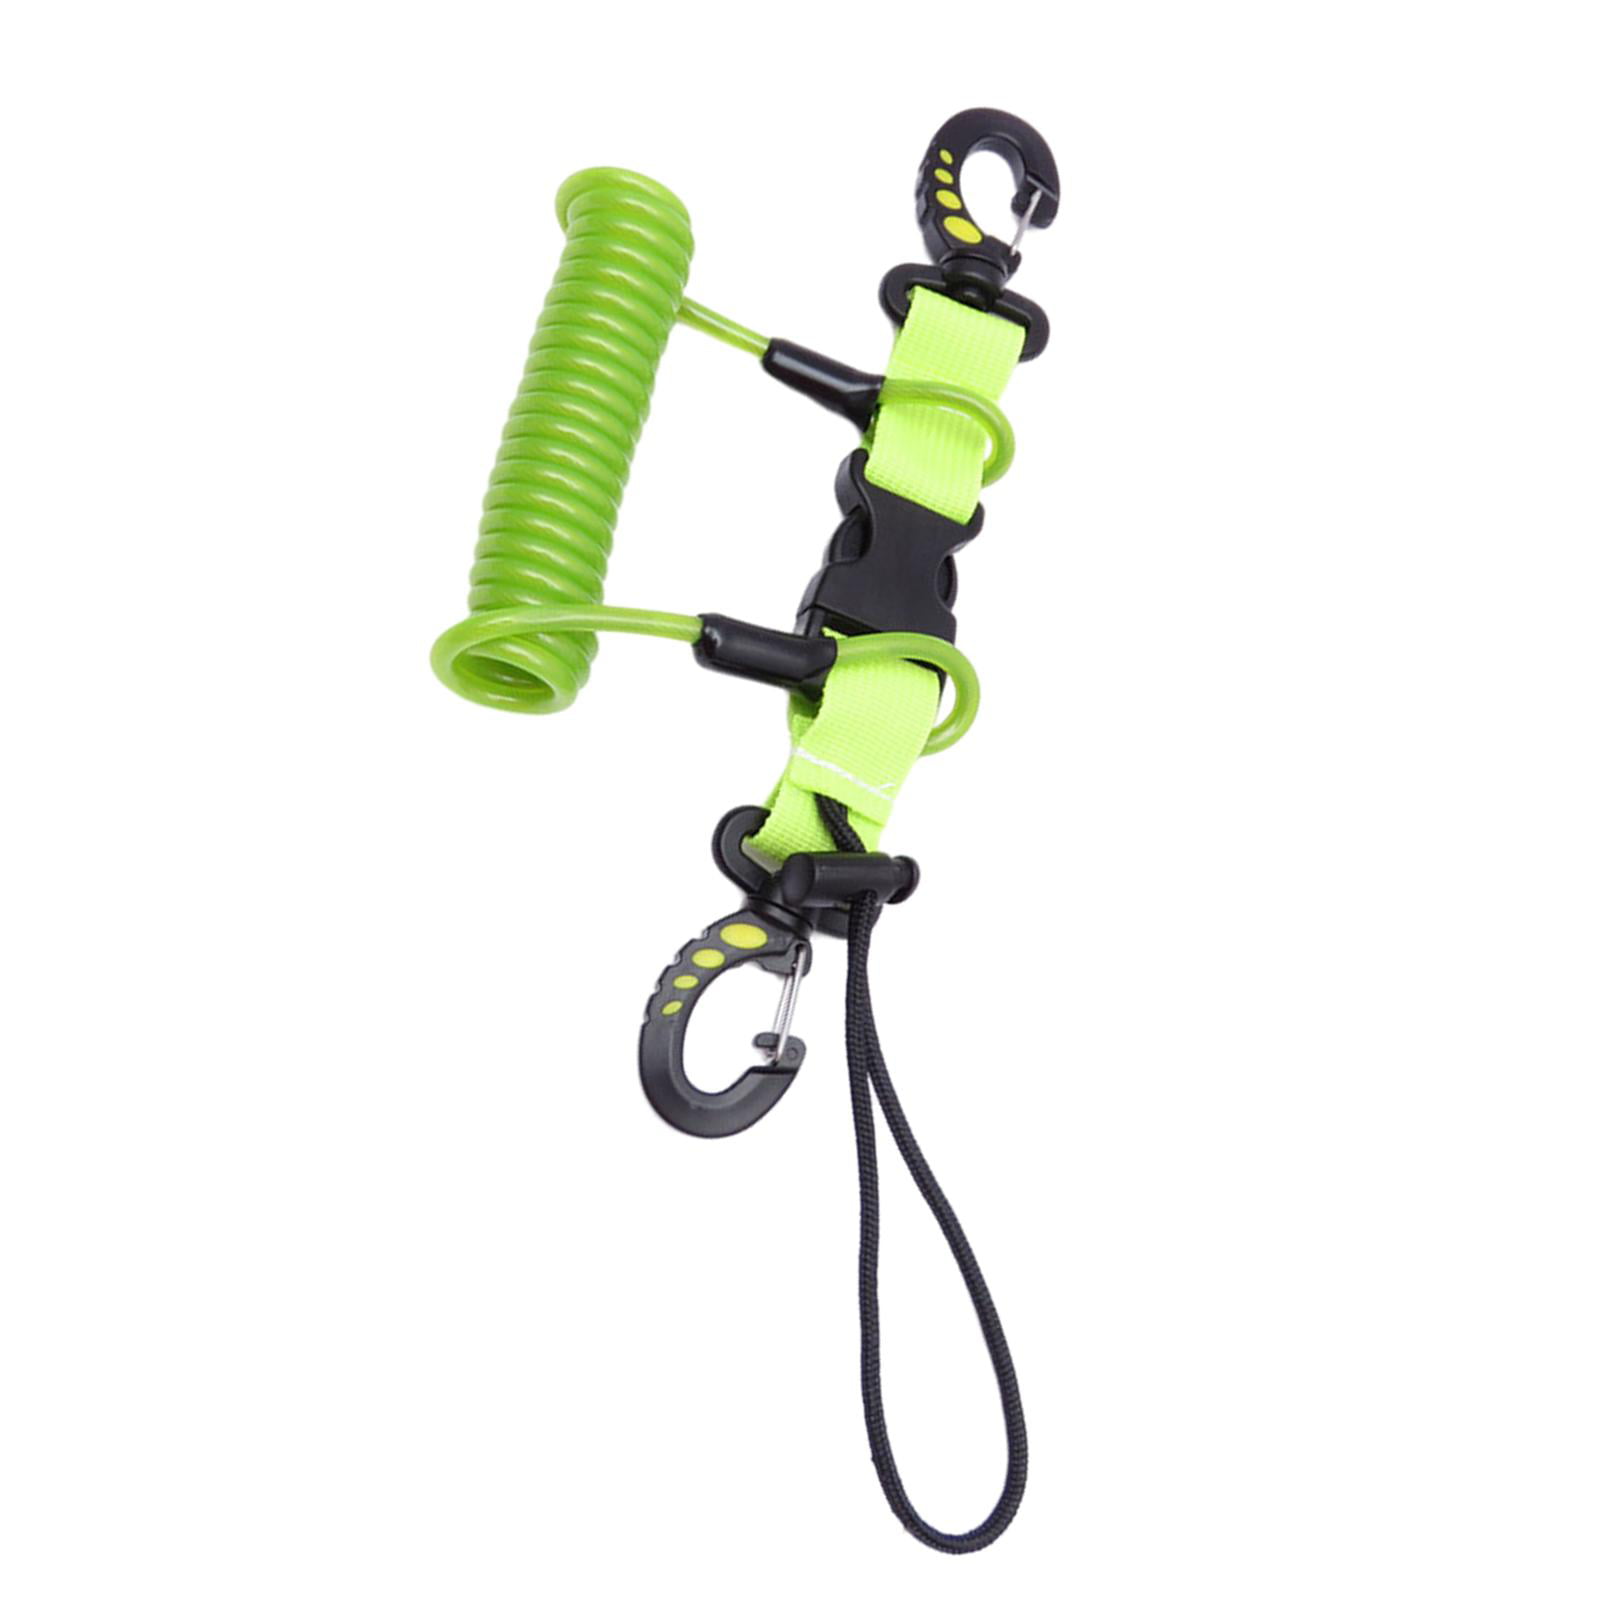 Scuba Diving Snorkeling Spring Coil Lanyard with Clips Quick Release Buckle 